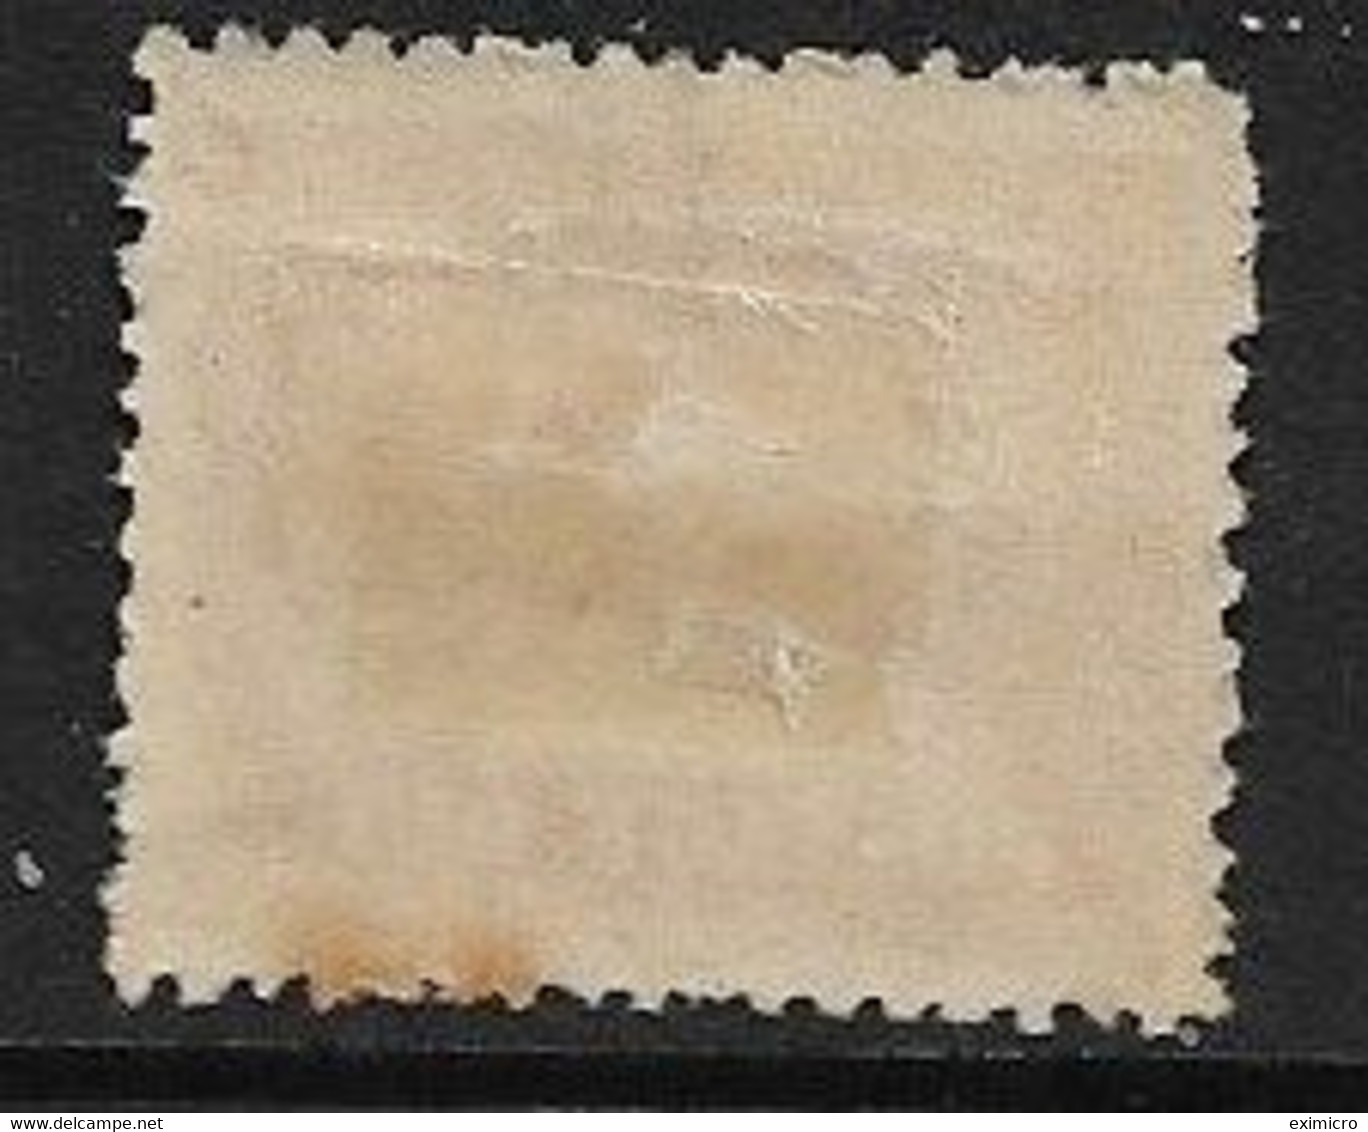 NEW ZEALAND 1943 - 1949 3d POSTAGE DUE FINE USED - WATERMARK UNCHECKED, FINE USED Minimum Cat £17 - Postage Due